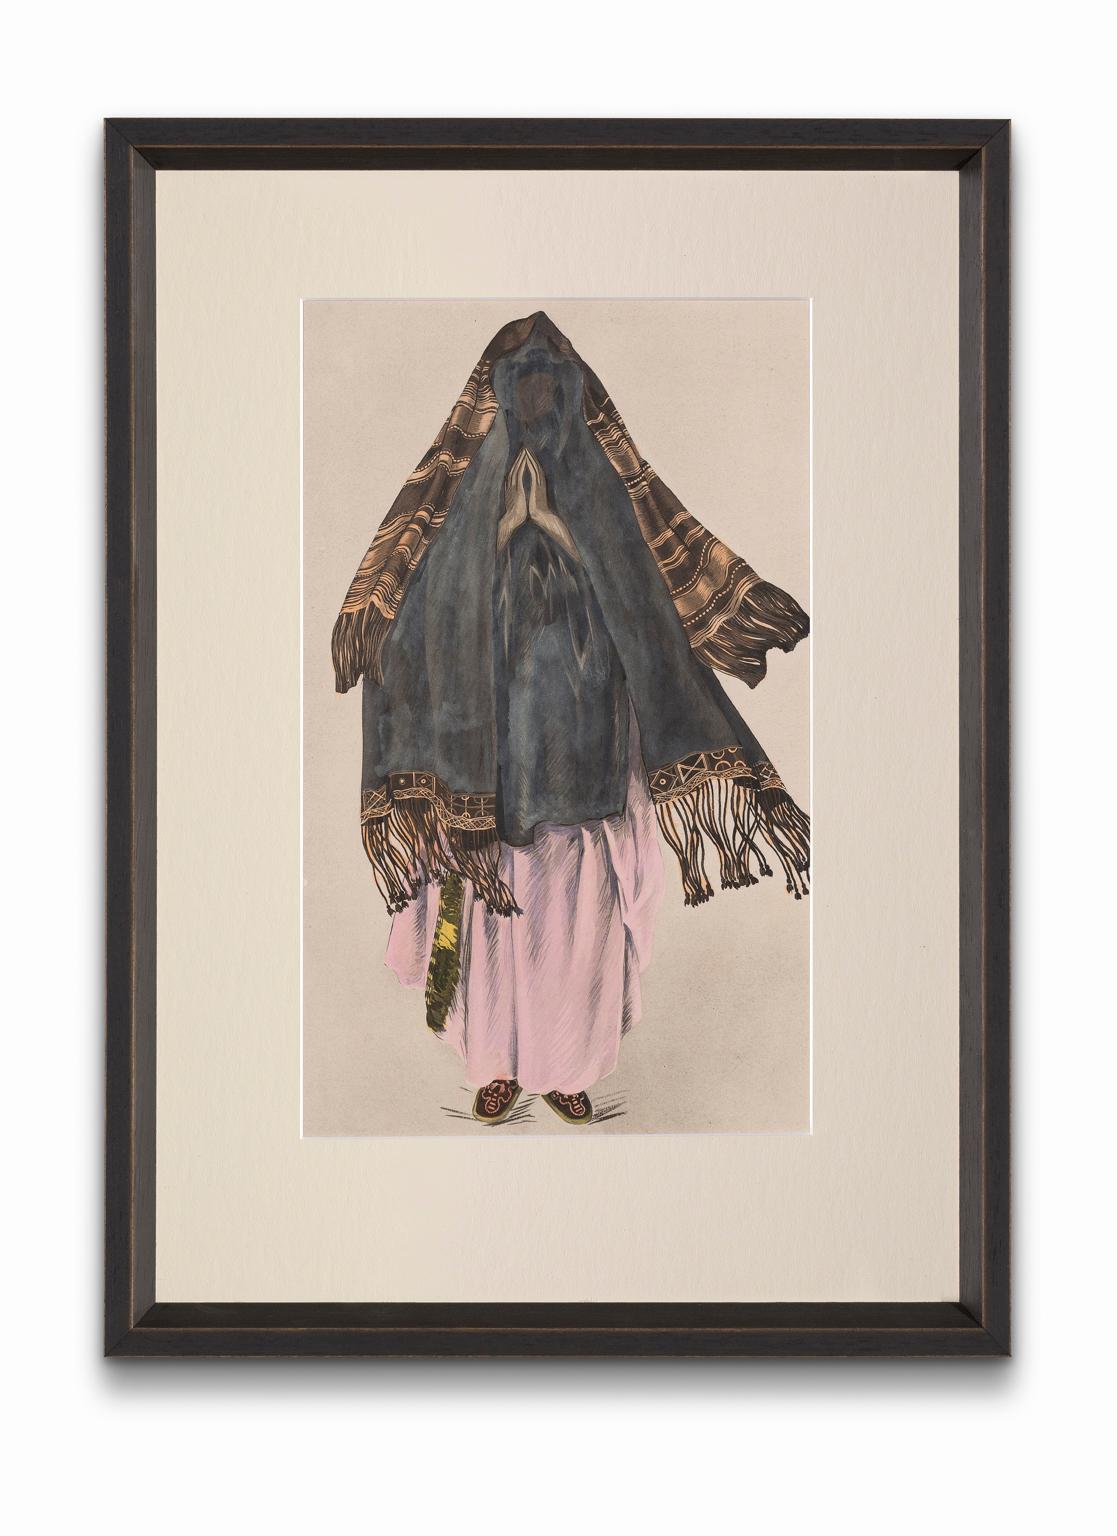 Jean Besancenot Portrait Print - "Woman Of Tagmout (Singing the Ahwash)" from "Costumes of Morocco"